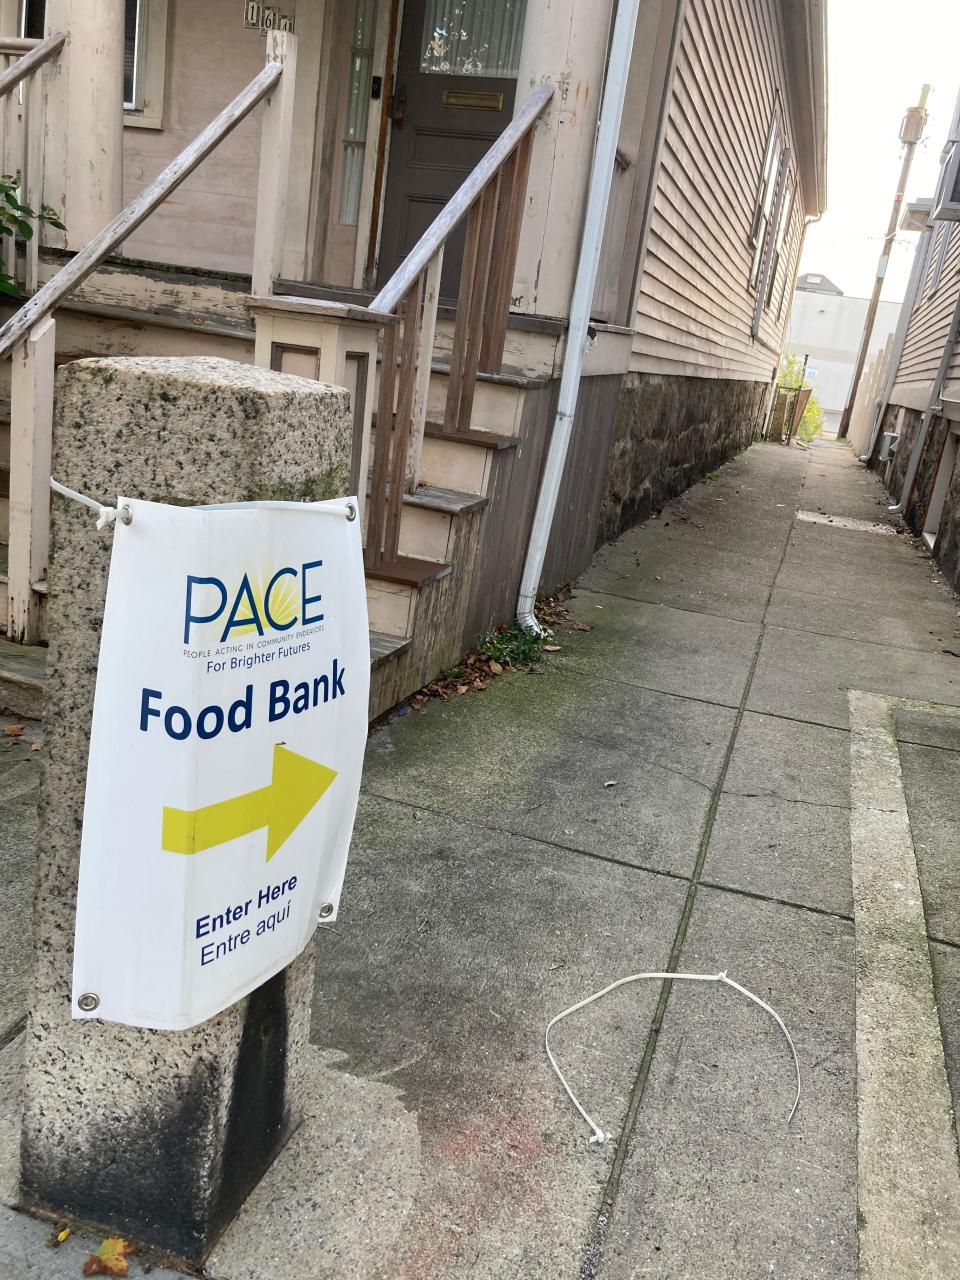 The PACE food bank serves an average of 6,000 plus individuals a year and has partnered with over 20 other agencies in the fight to end food insecurity.